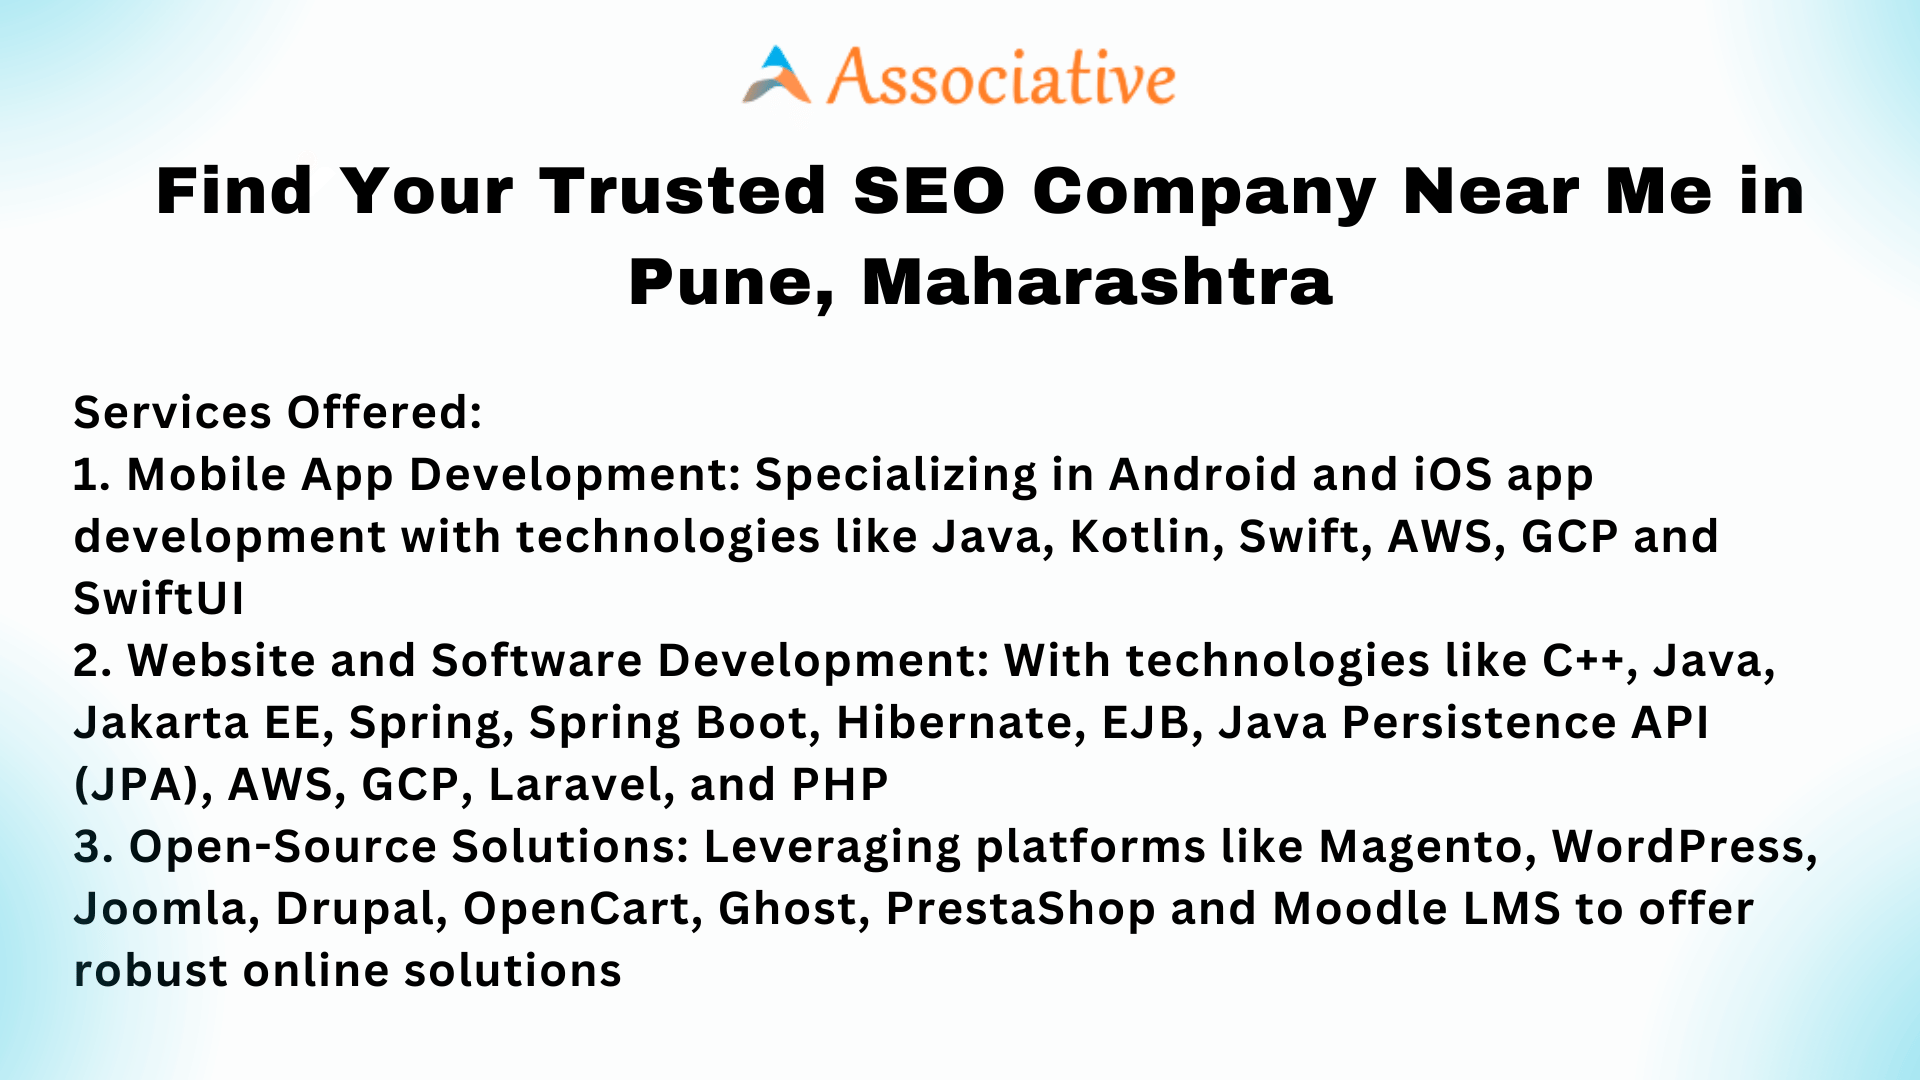 Find Your Trusted SEO Company Near Me in Pune, Maharashtra